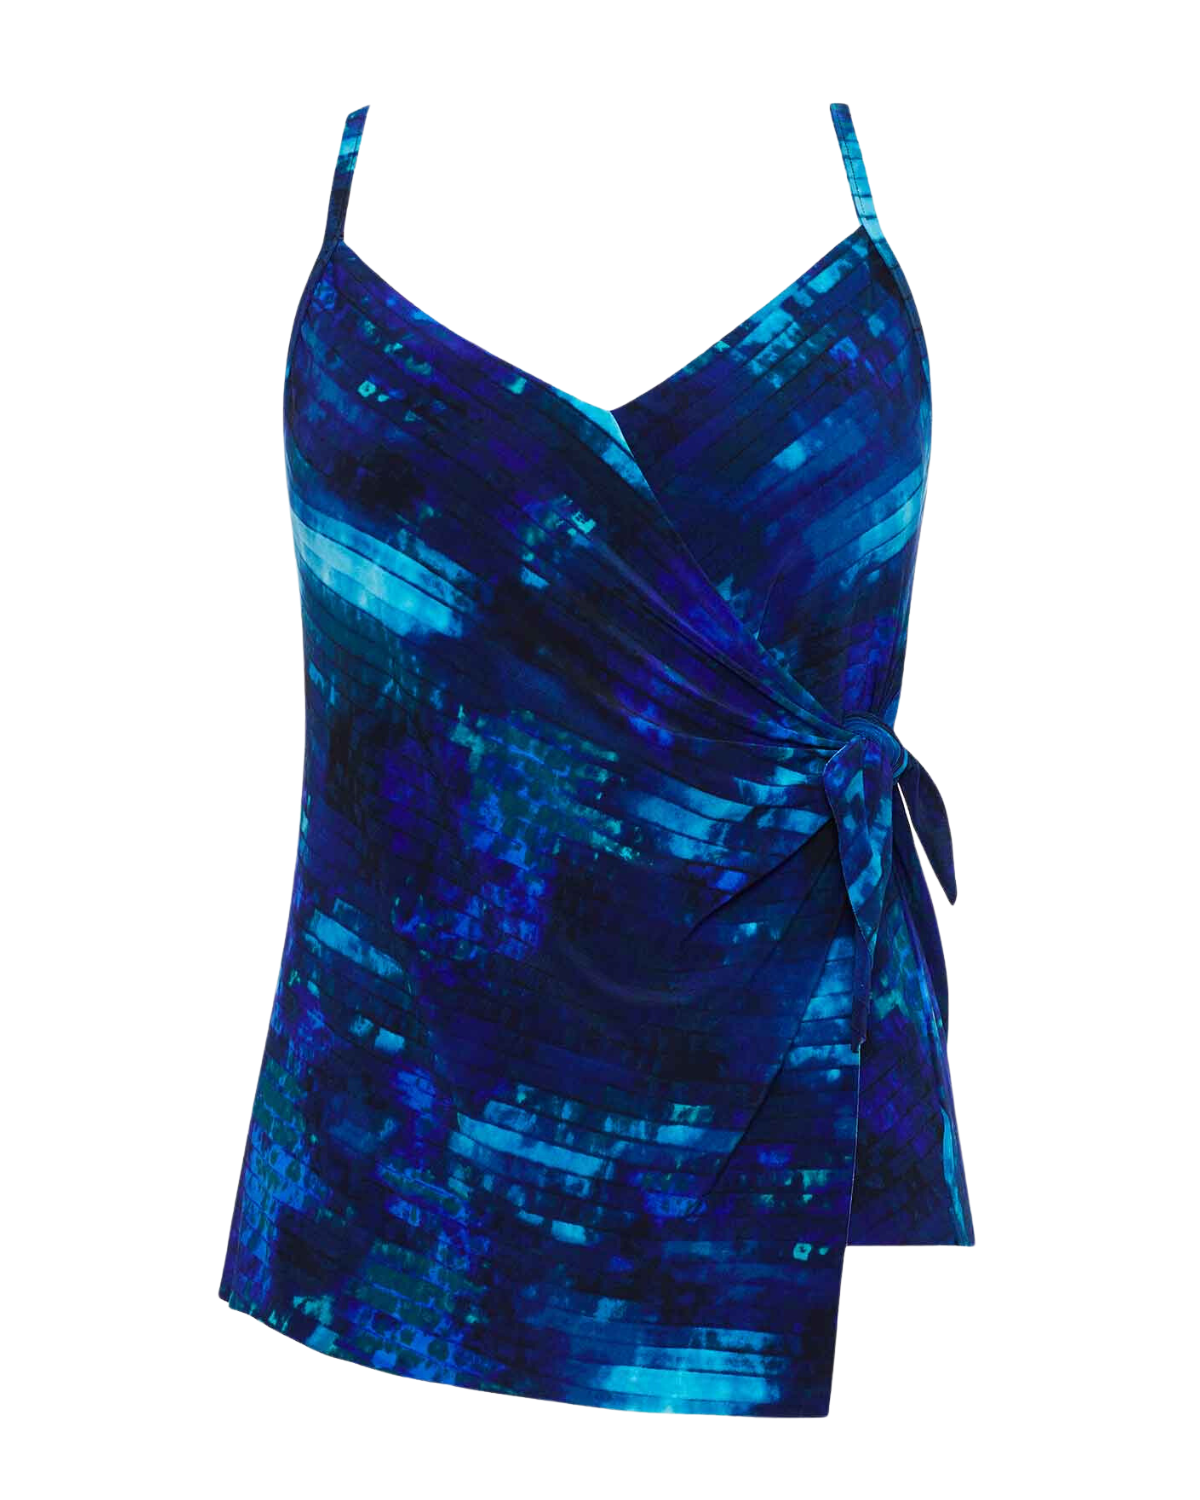 Flat lay of a tankini top with adjustable straps in and abstract blue, black and navy 